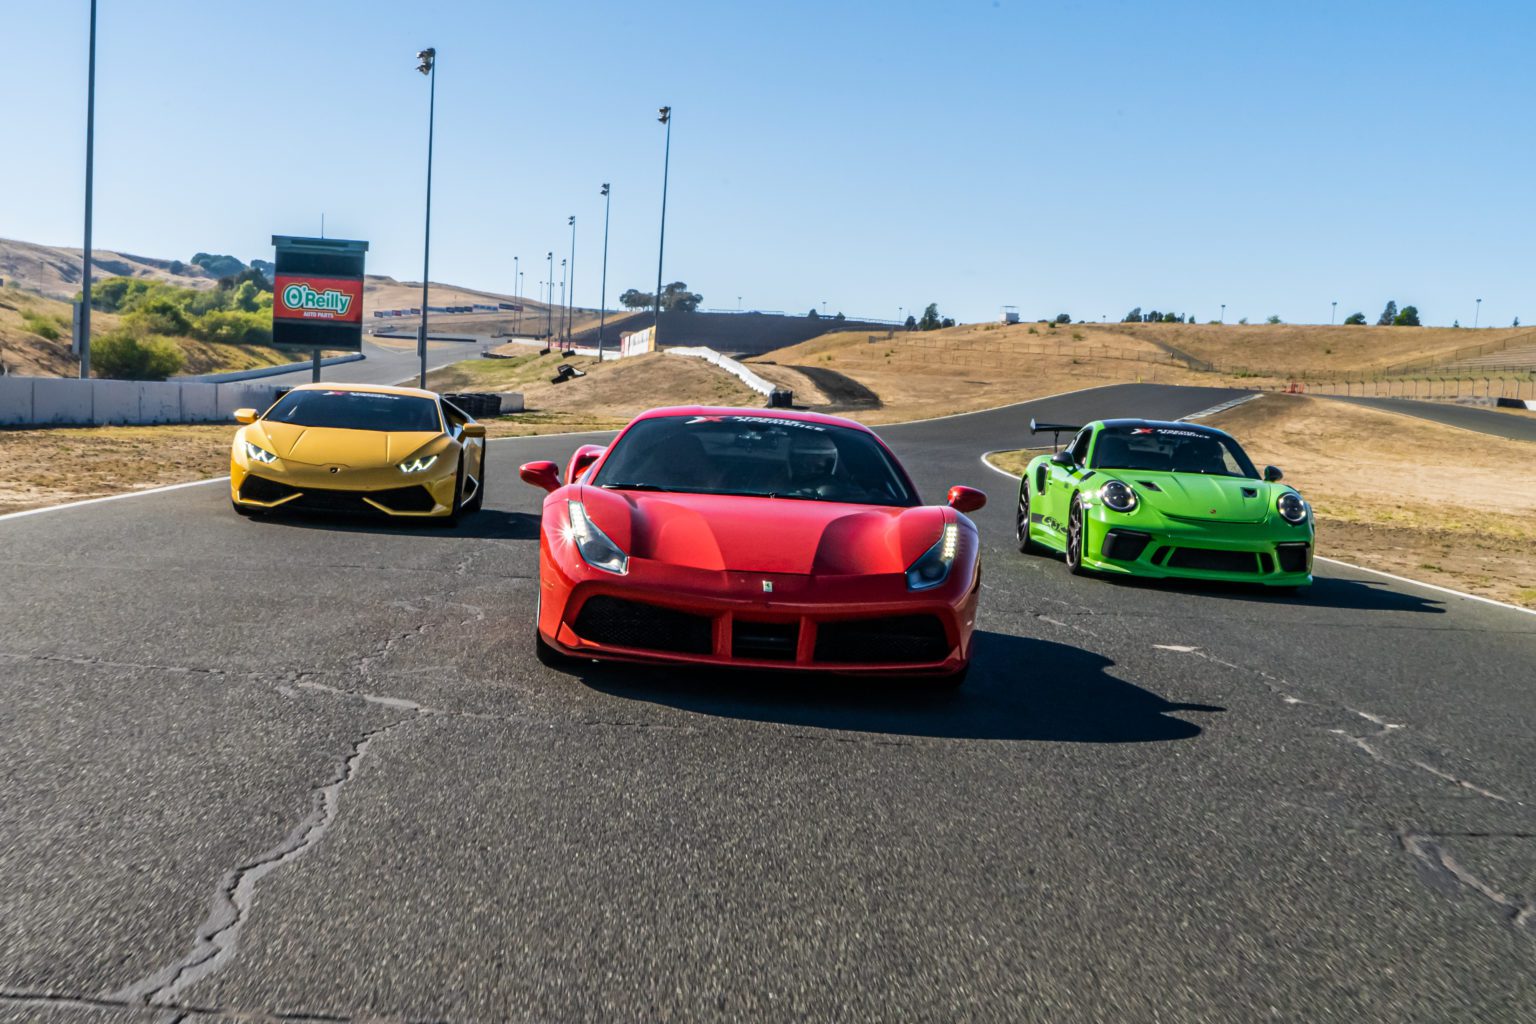 Xtreme Xperience's podium package driving on Sonoma Raceway's track